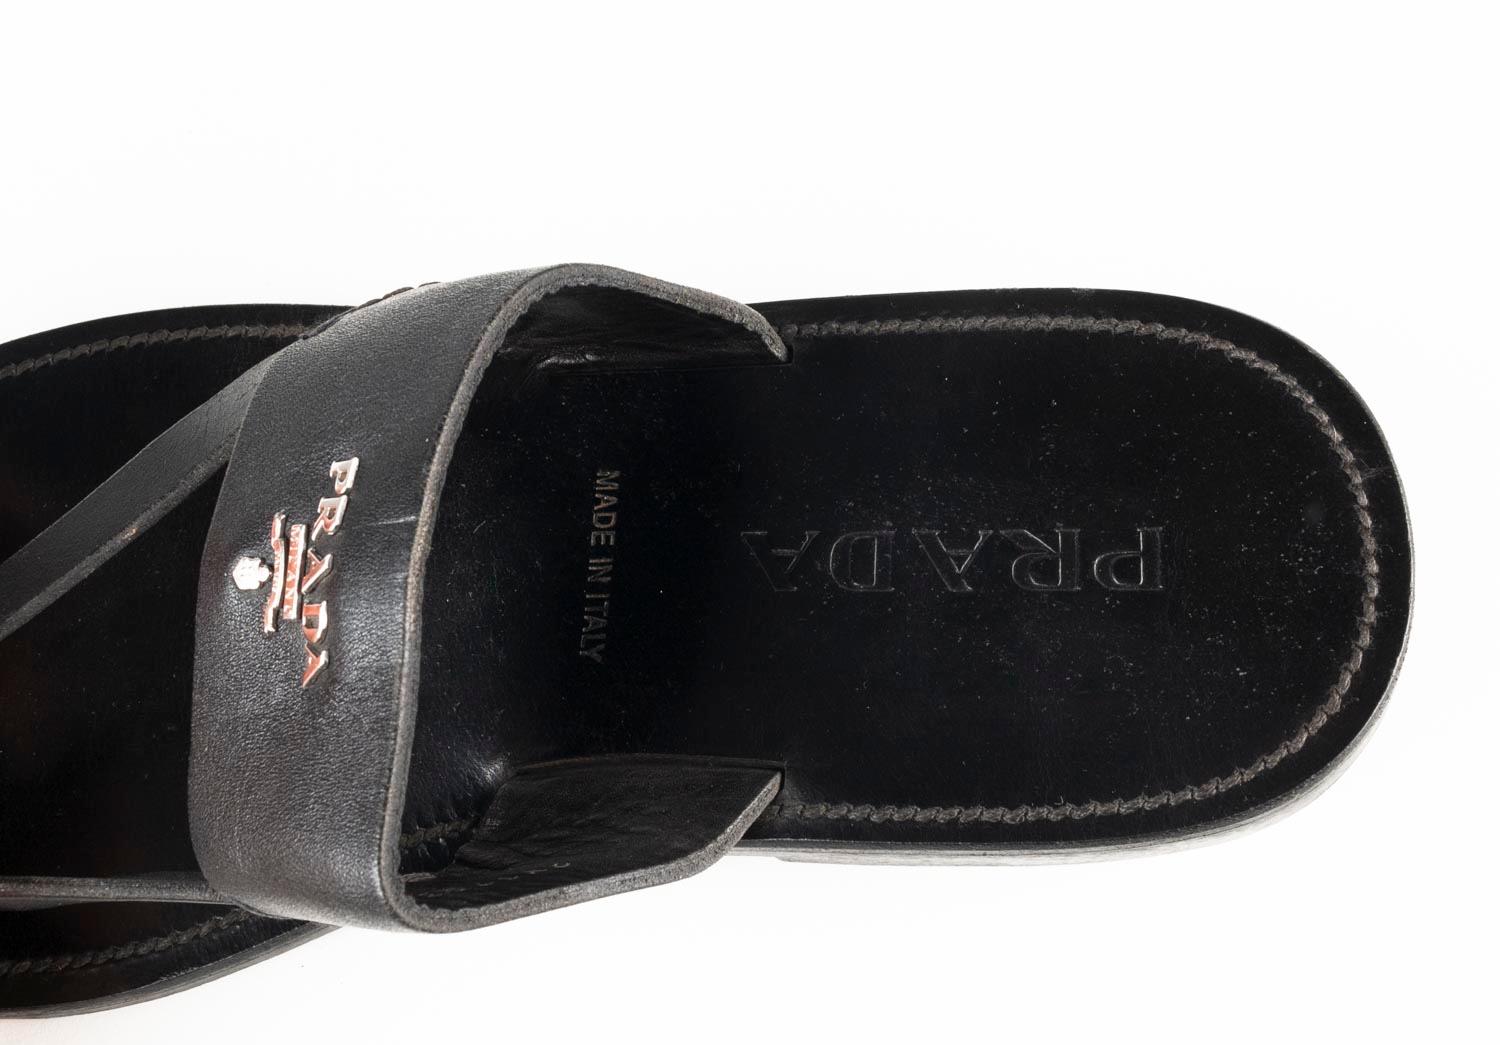 Prada Slippers Leather Sandals Men Shoes Size UK7 EUR41, USA 8, S614 For Sale 2